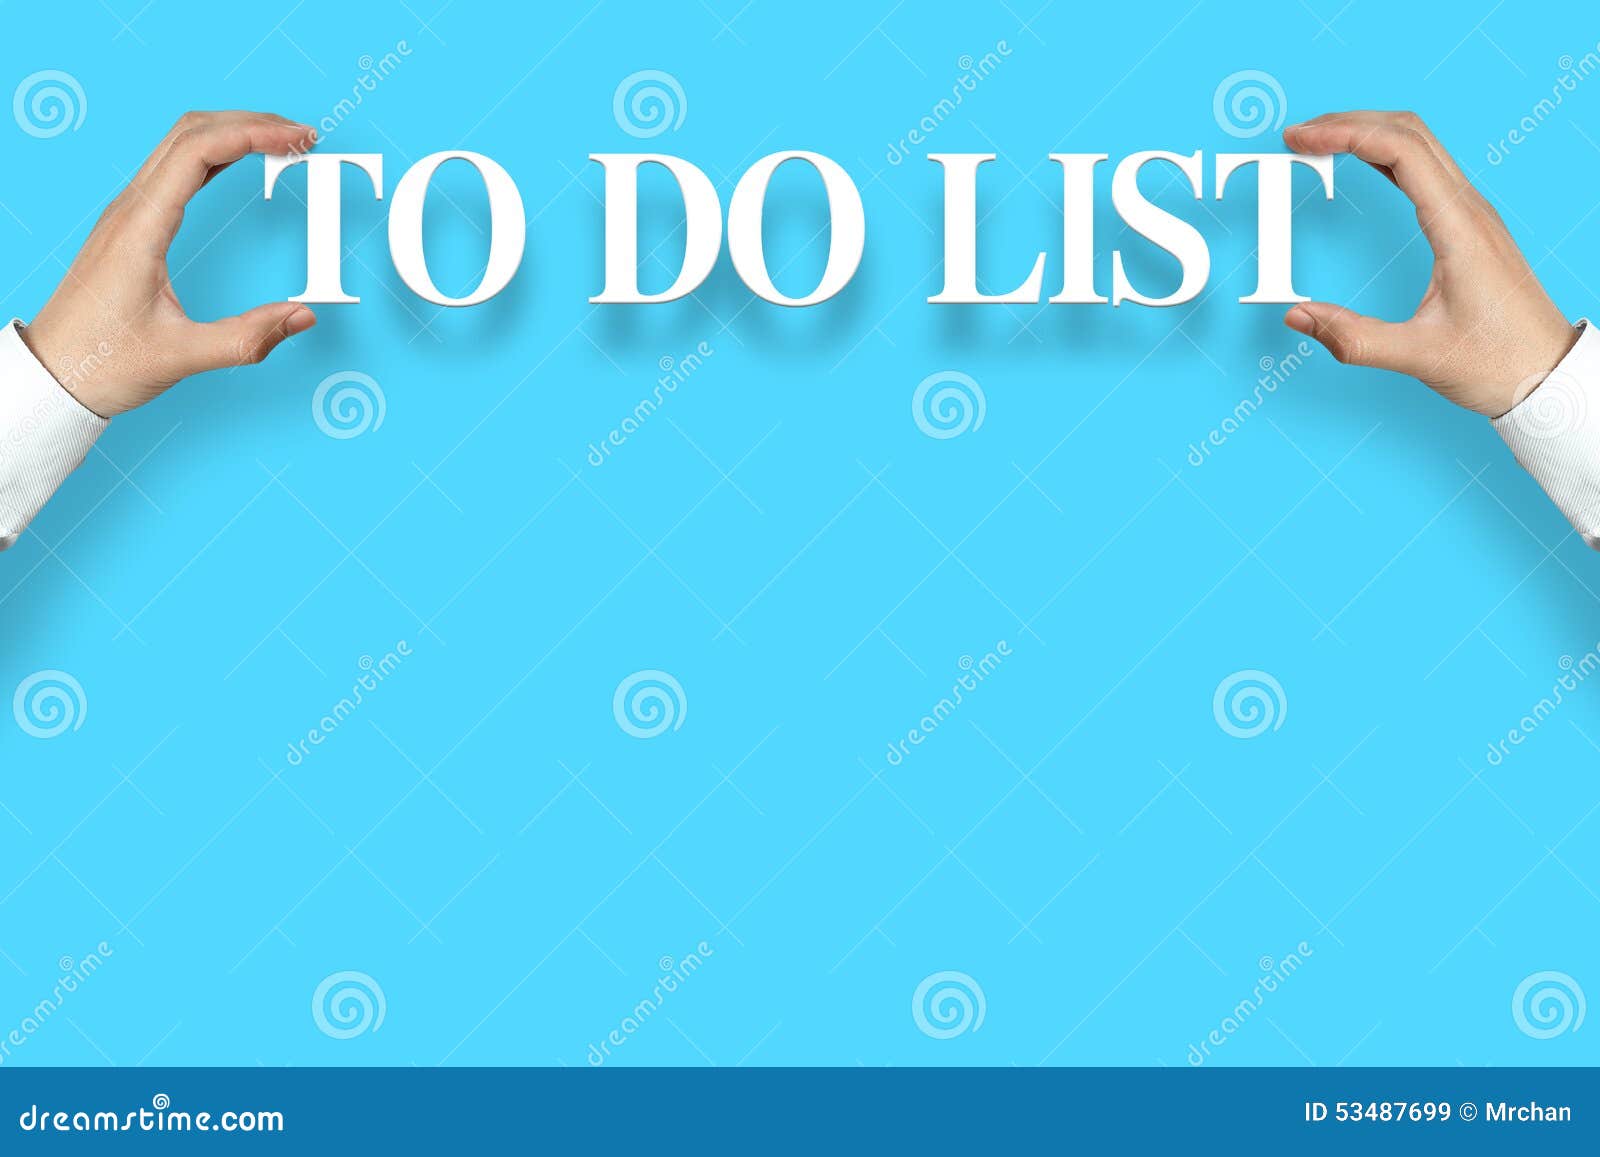 To do list stock image. Image of message, business, check - 53487699